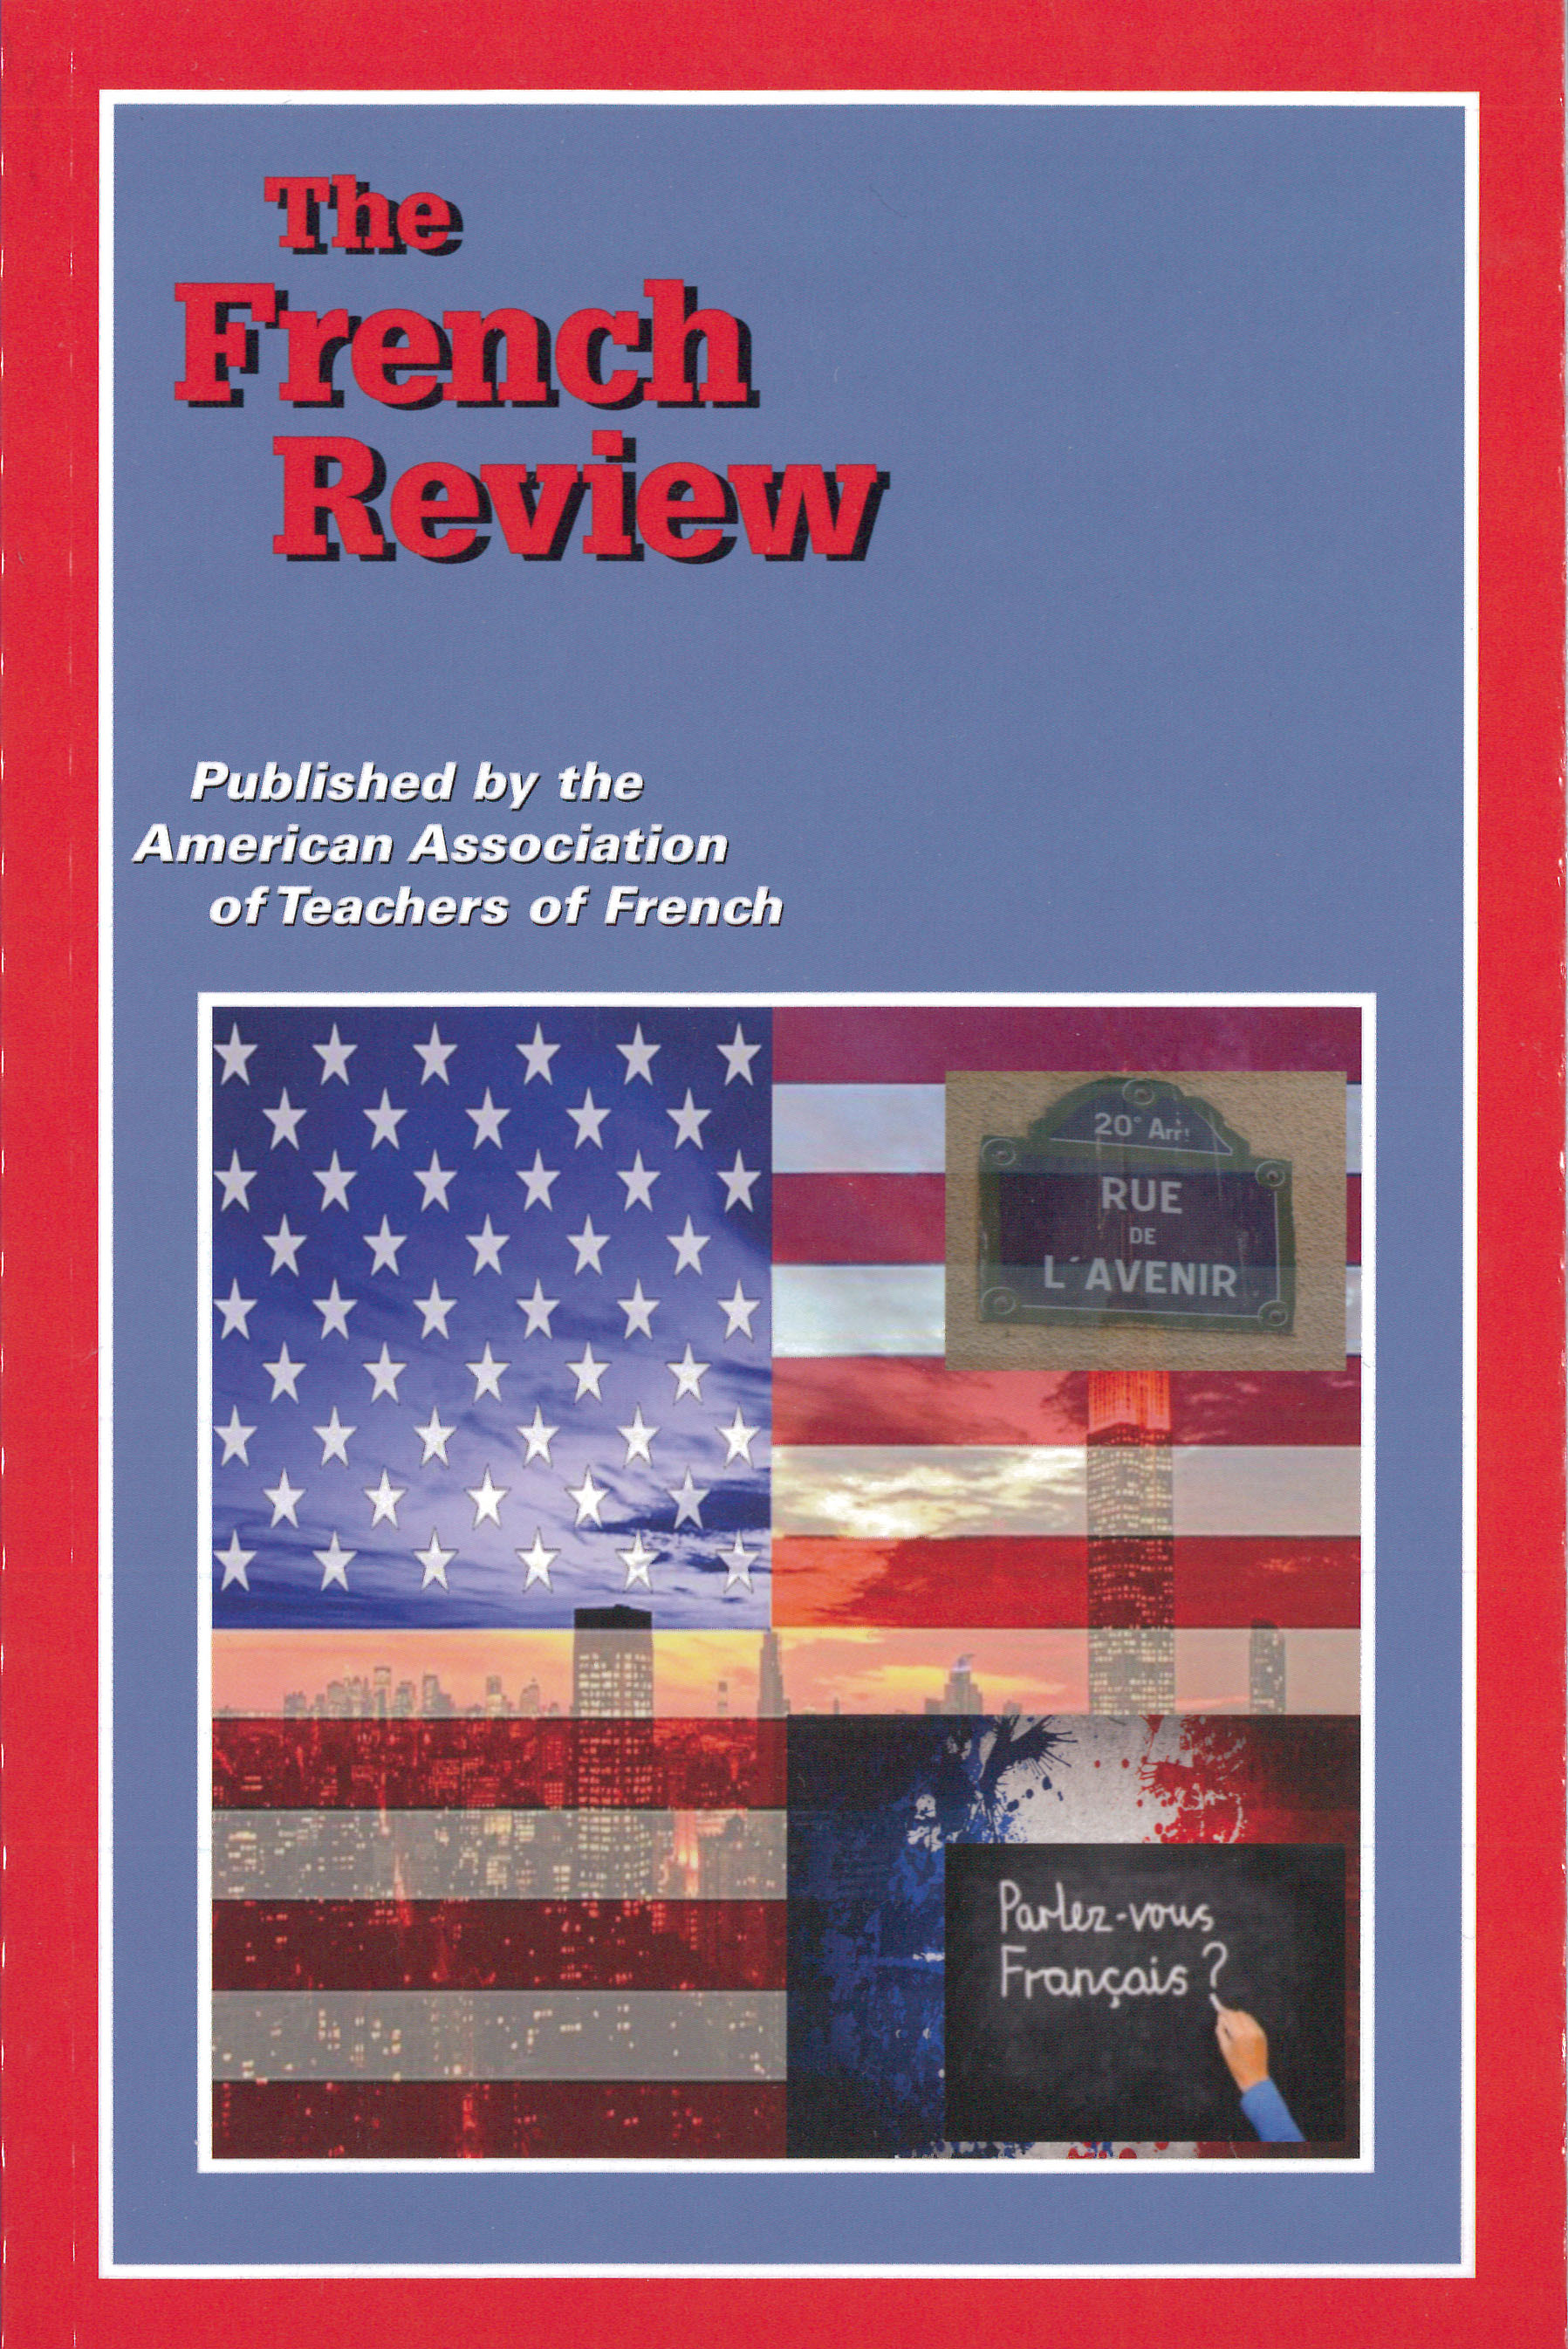 The french Review